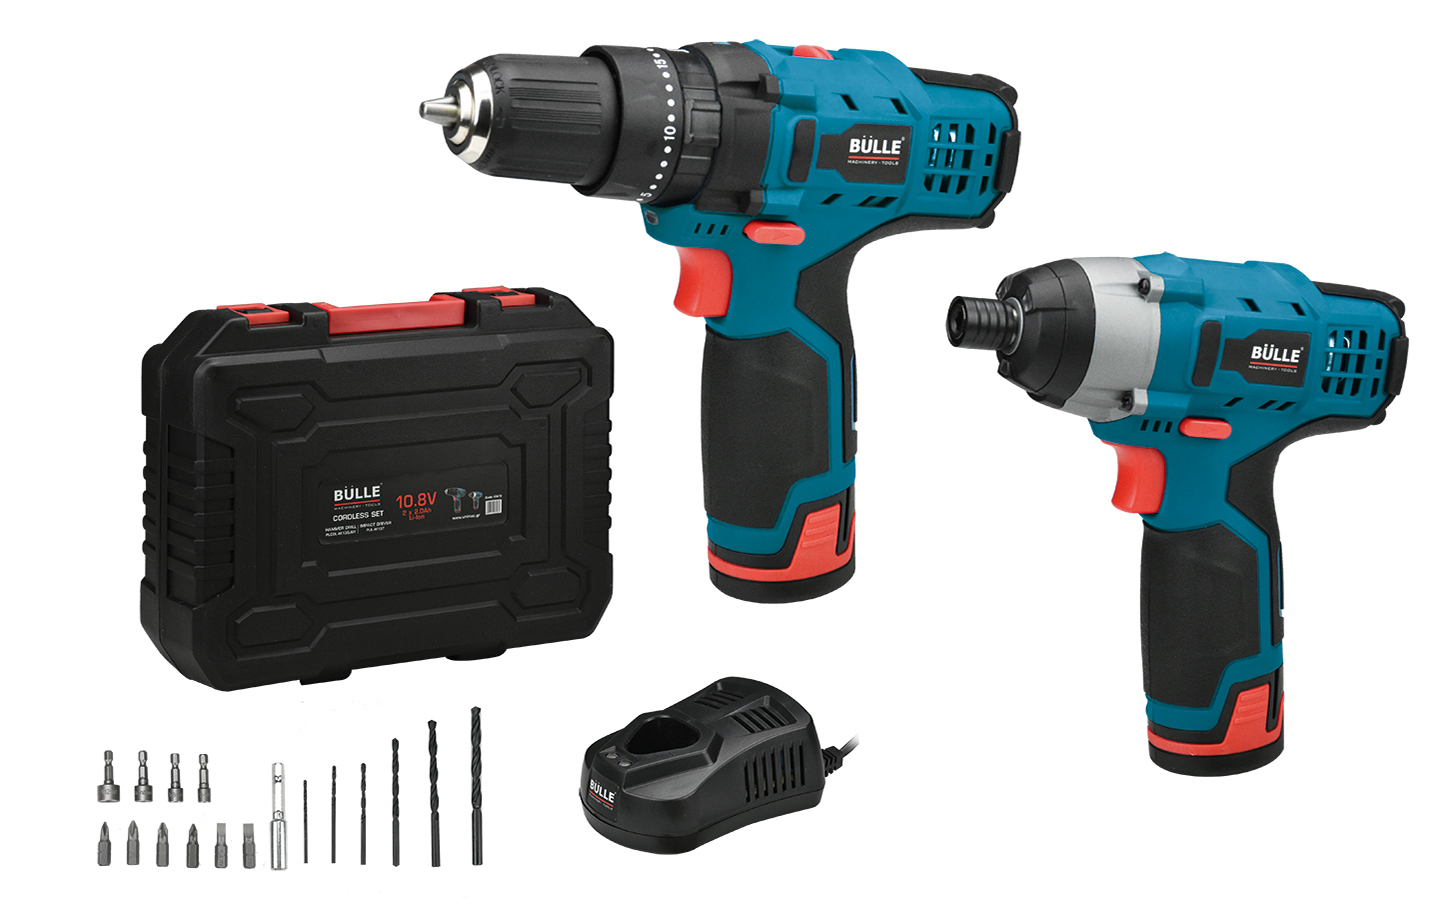 Lithium Hammer Drill and Screwdriver Set 10.8V Bulle - 1